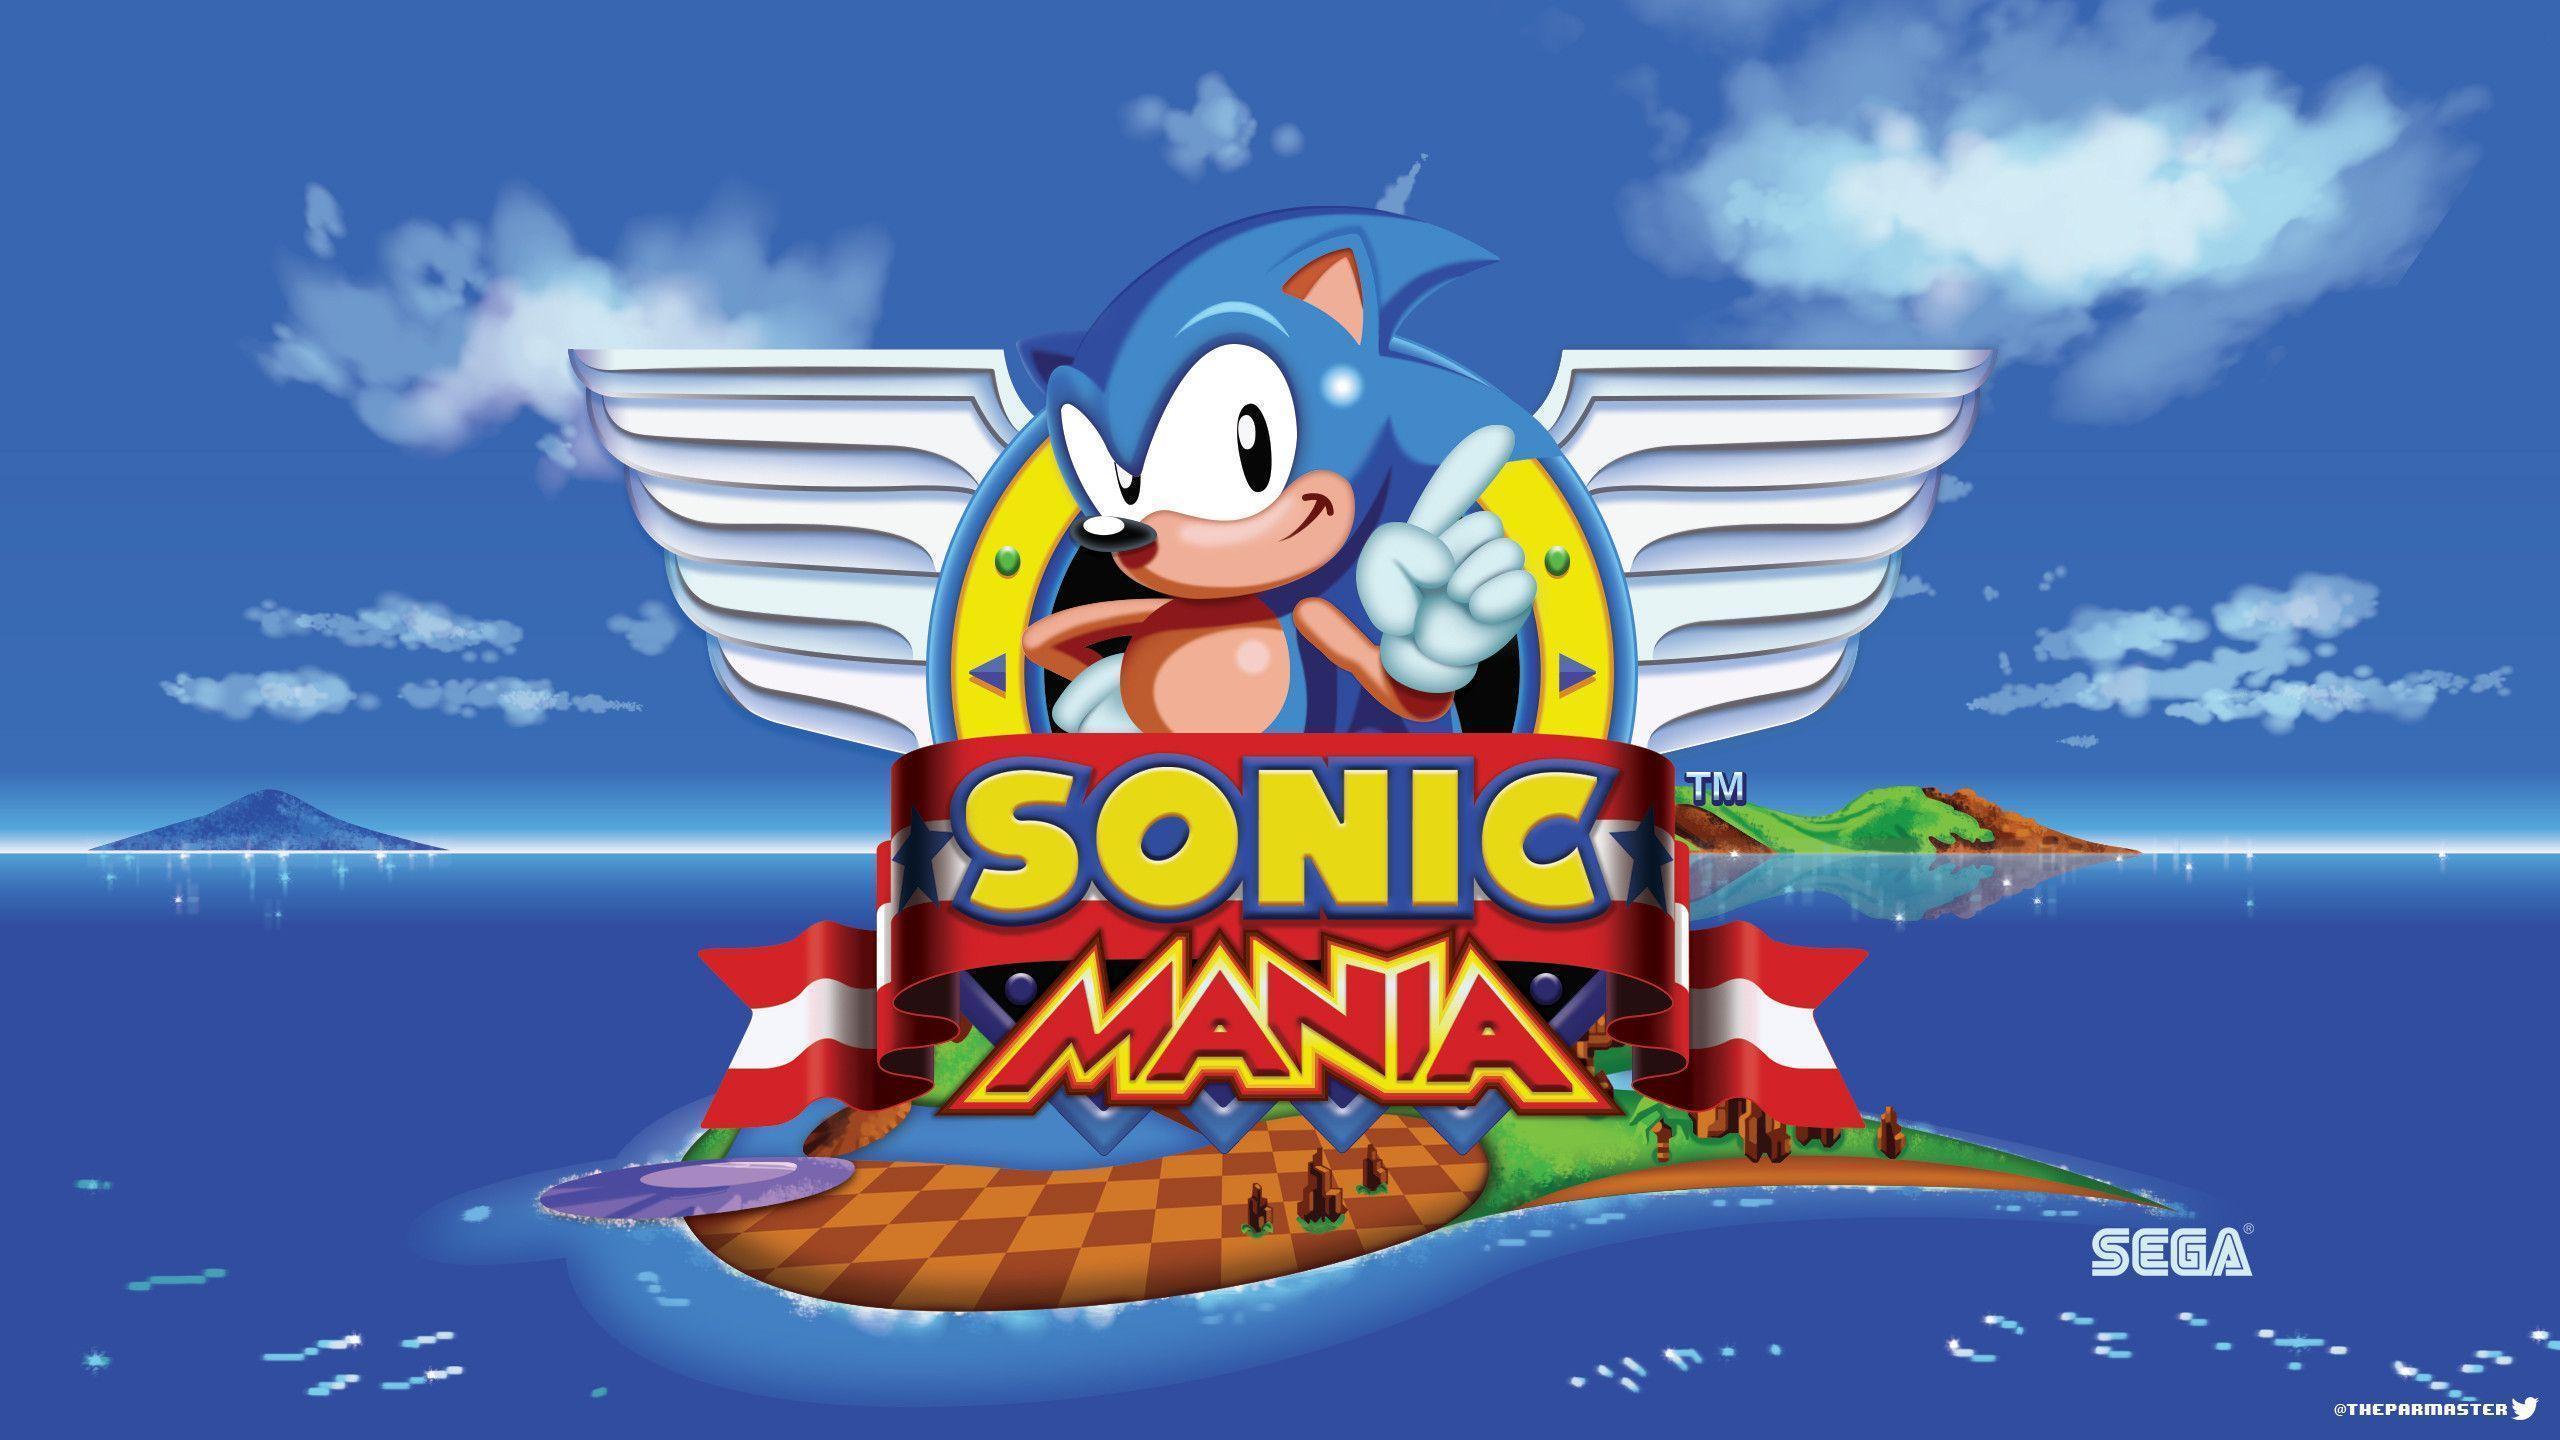 Sonic mania 3d fan game download - bxeuv